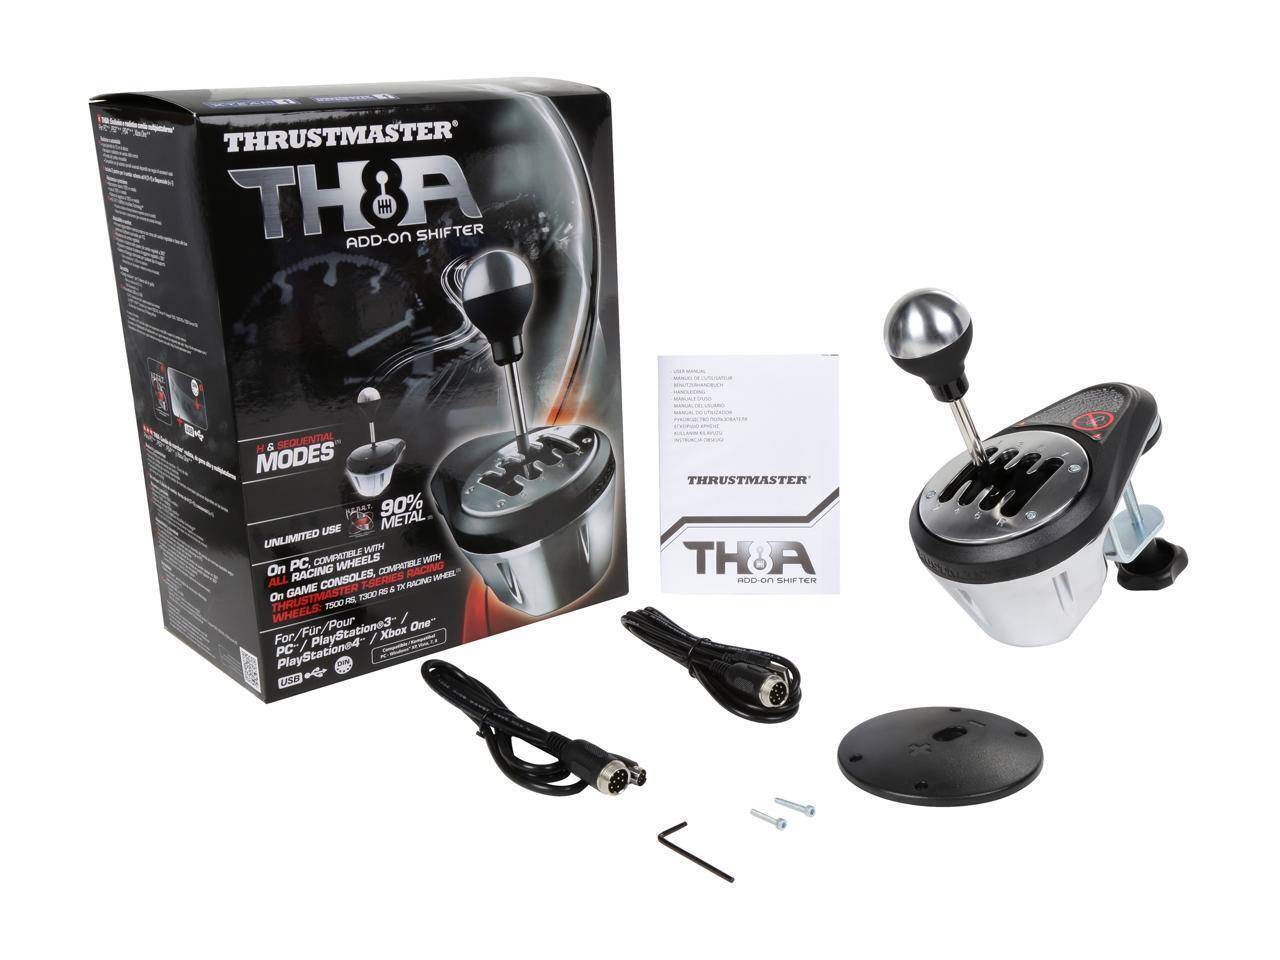 Thrustmaster VG TH8A Add-On Gearbox Shifter for PC, PS3, PS4 and Xbox One -  Invastor